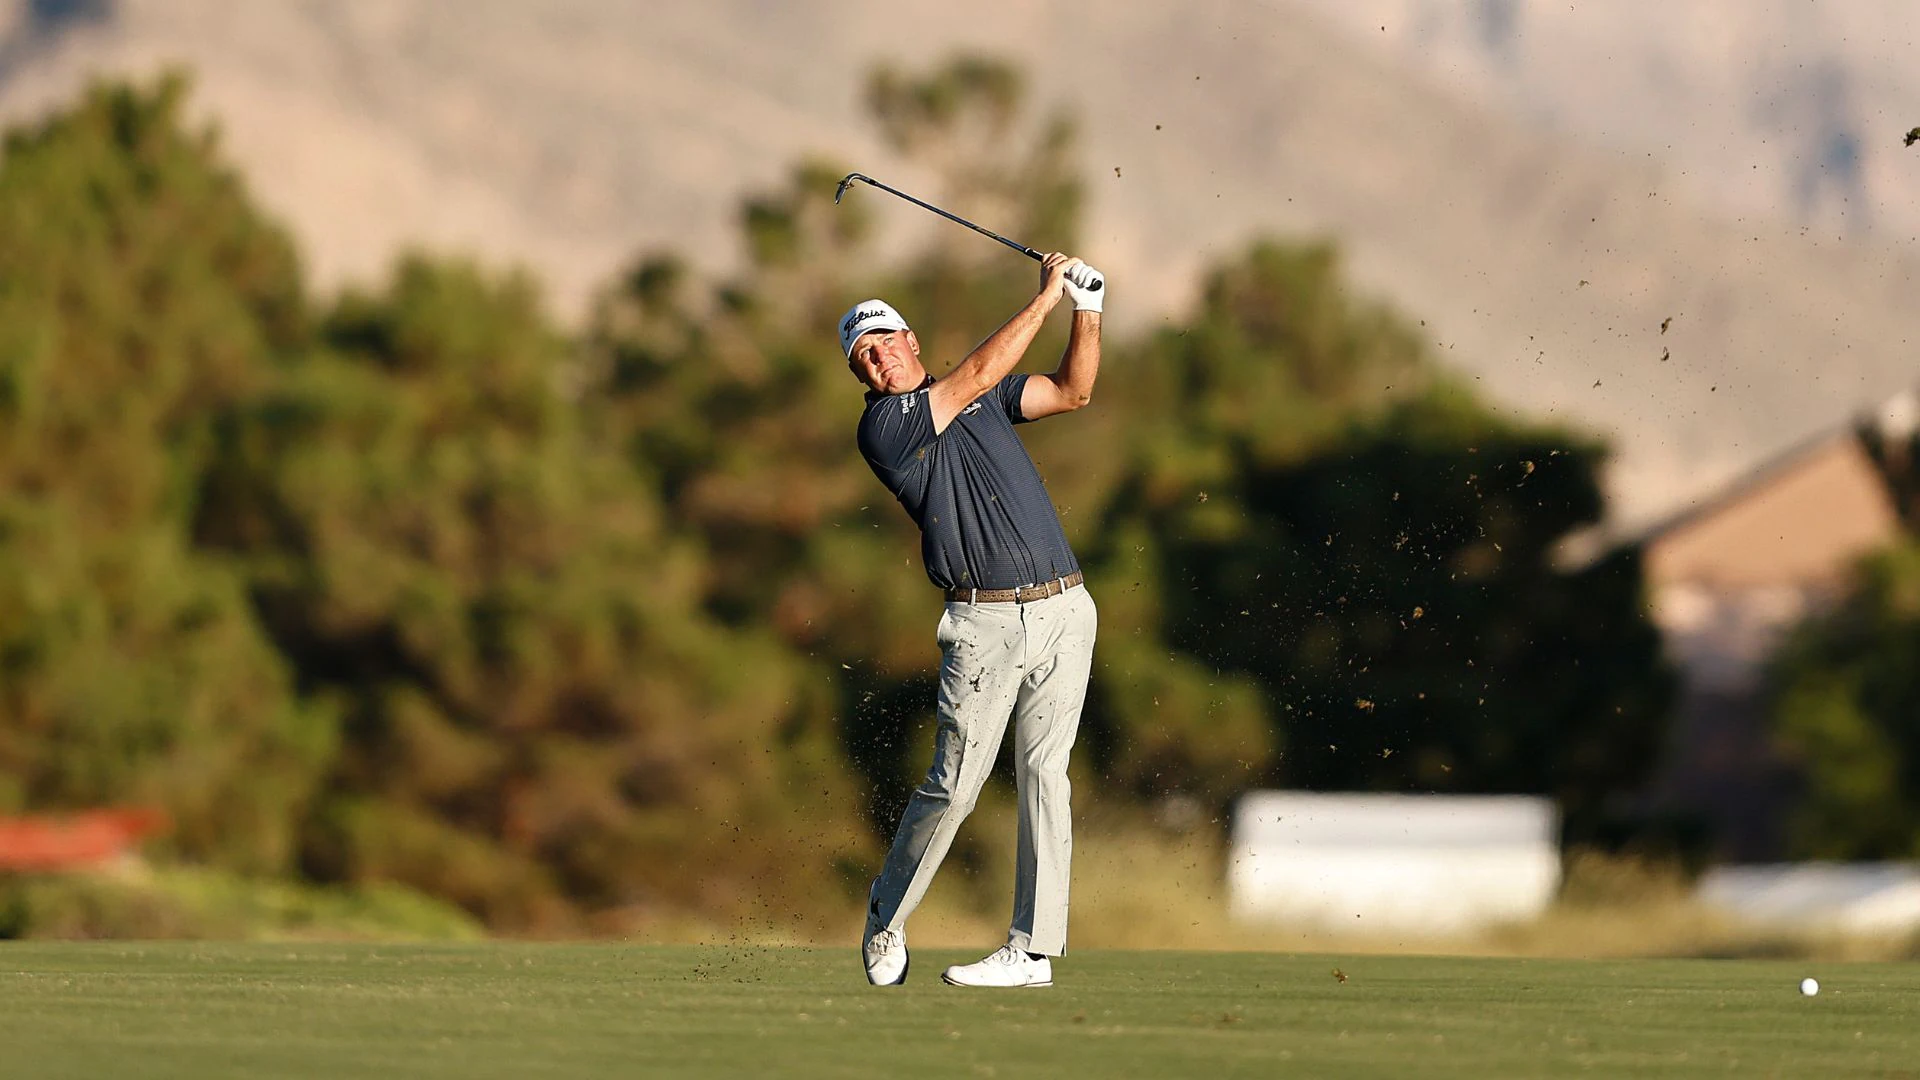 Tom Hoge takes opening Shriners Children’s Open lead amid ‘interesting day’